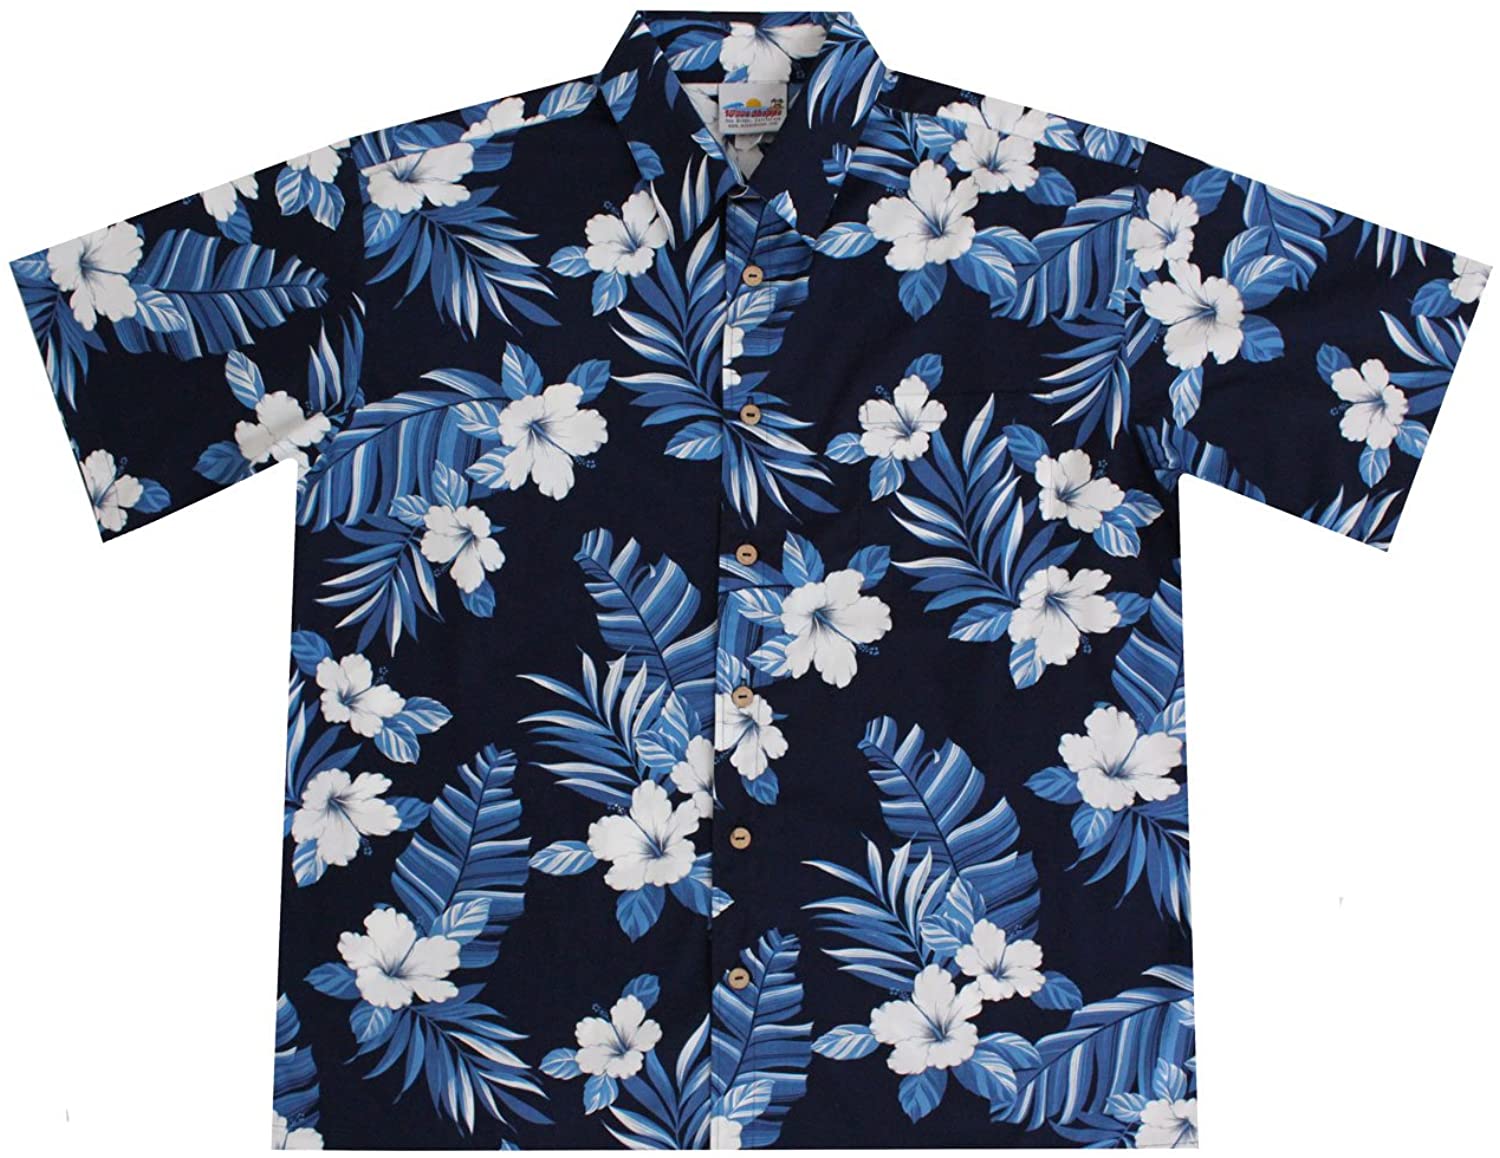 Men's Navy Blue Hawaiian Shirts With Hibiscus Flowers - Pick A Quilt